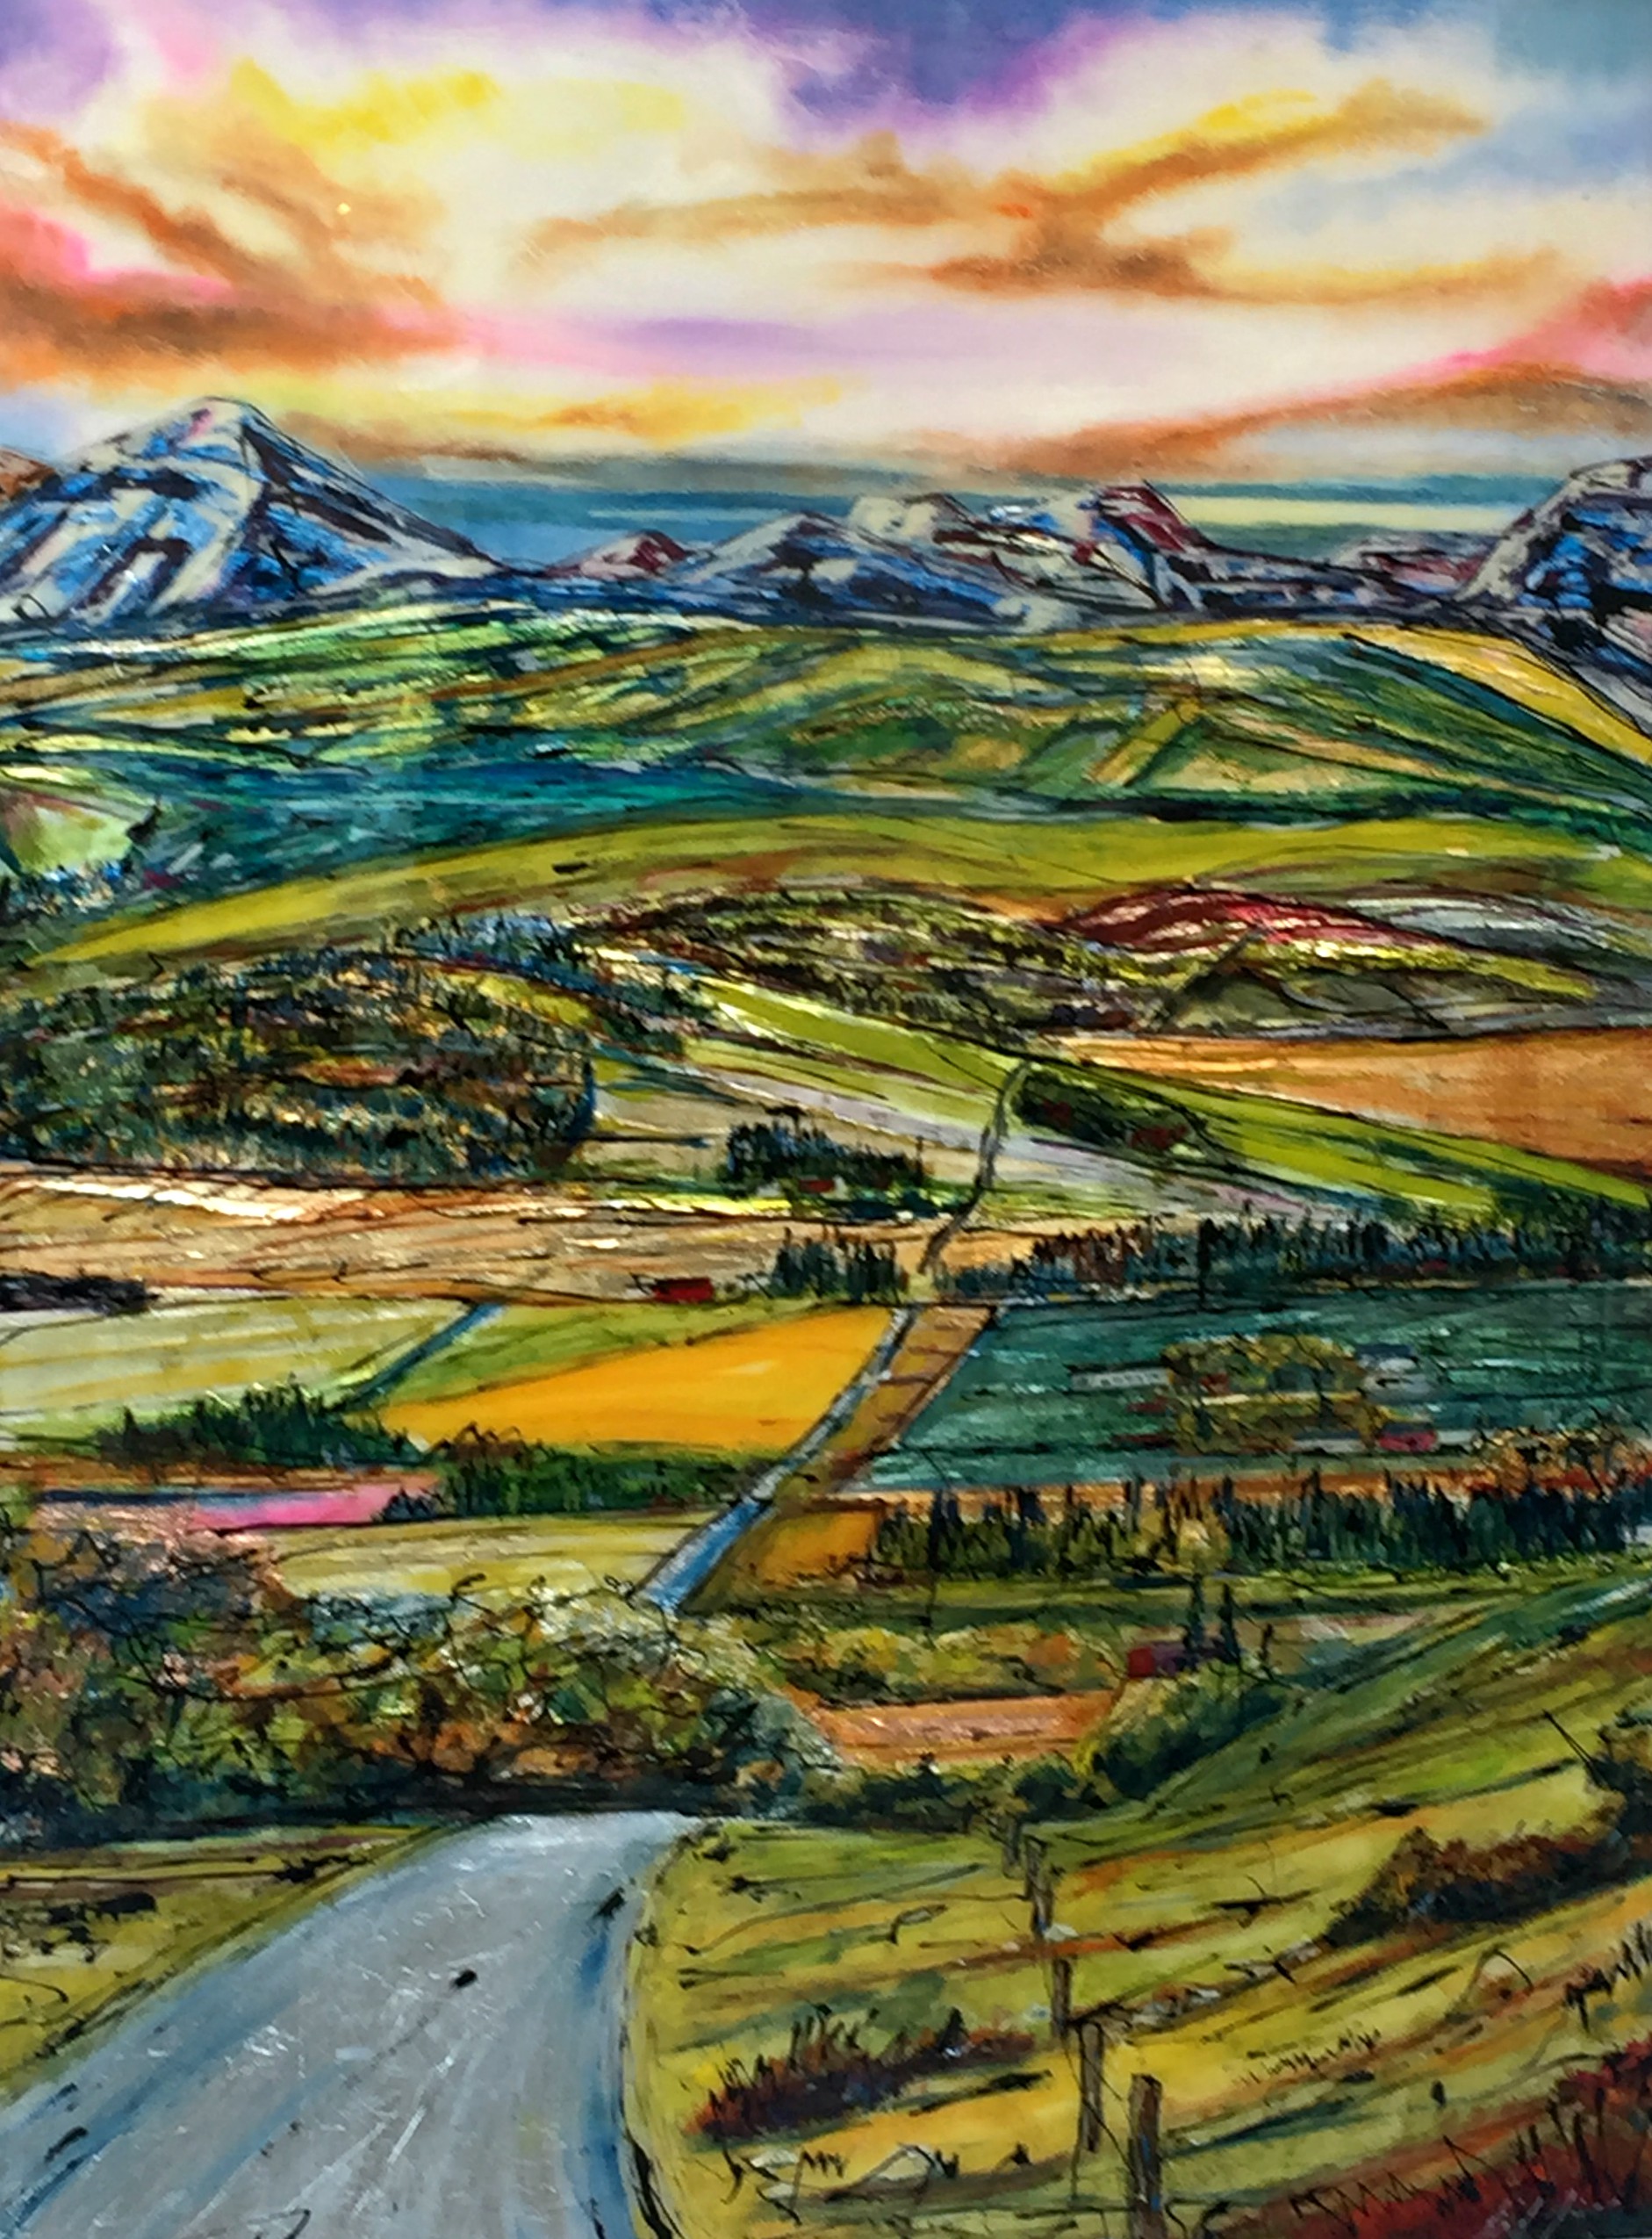 Stairway Too...  mixed media landscape painting by David Zimmerman | Effusion Art Gallery + Cast Glass Studio, Invermere BC